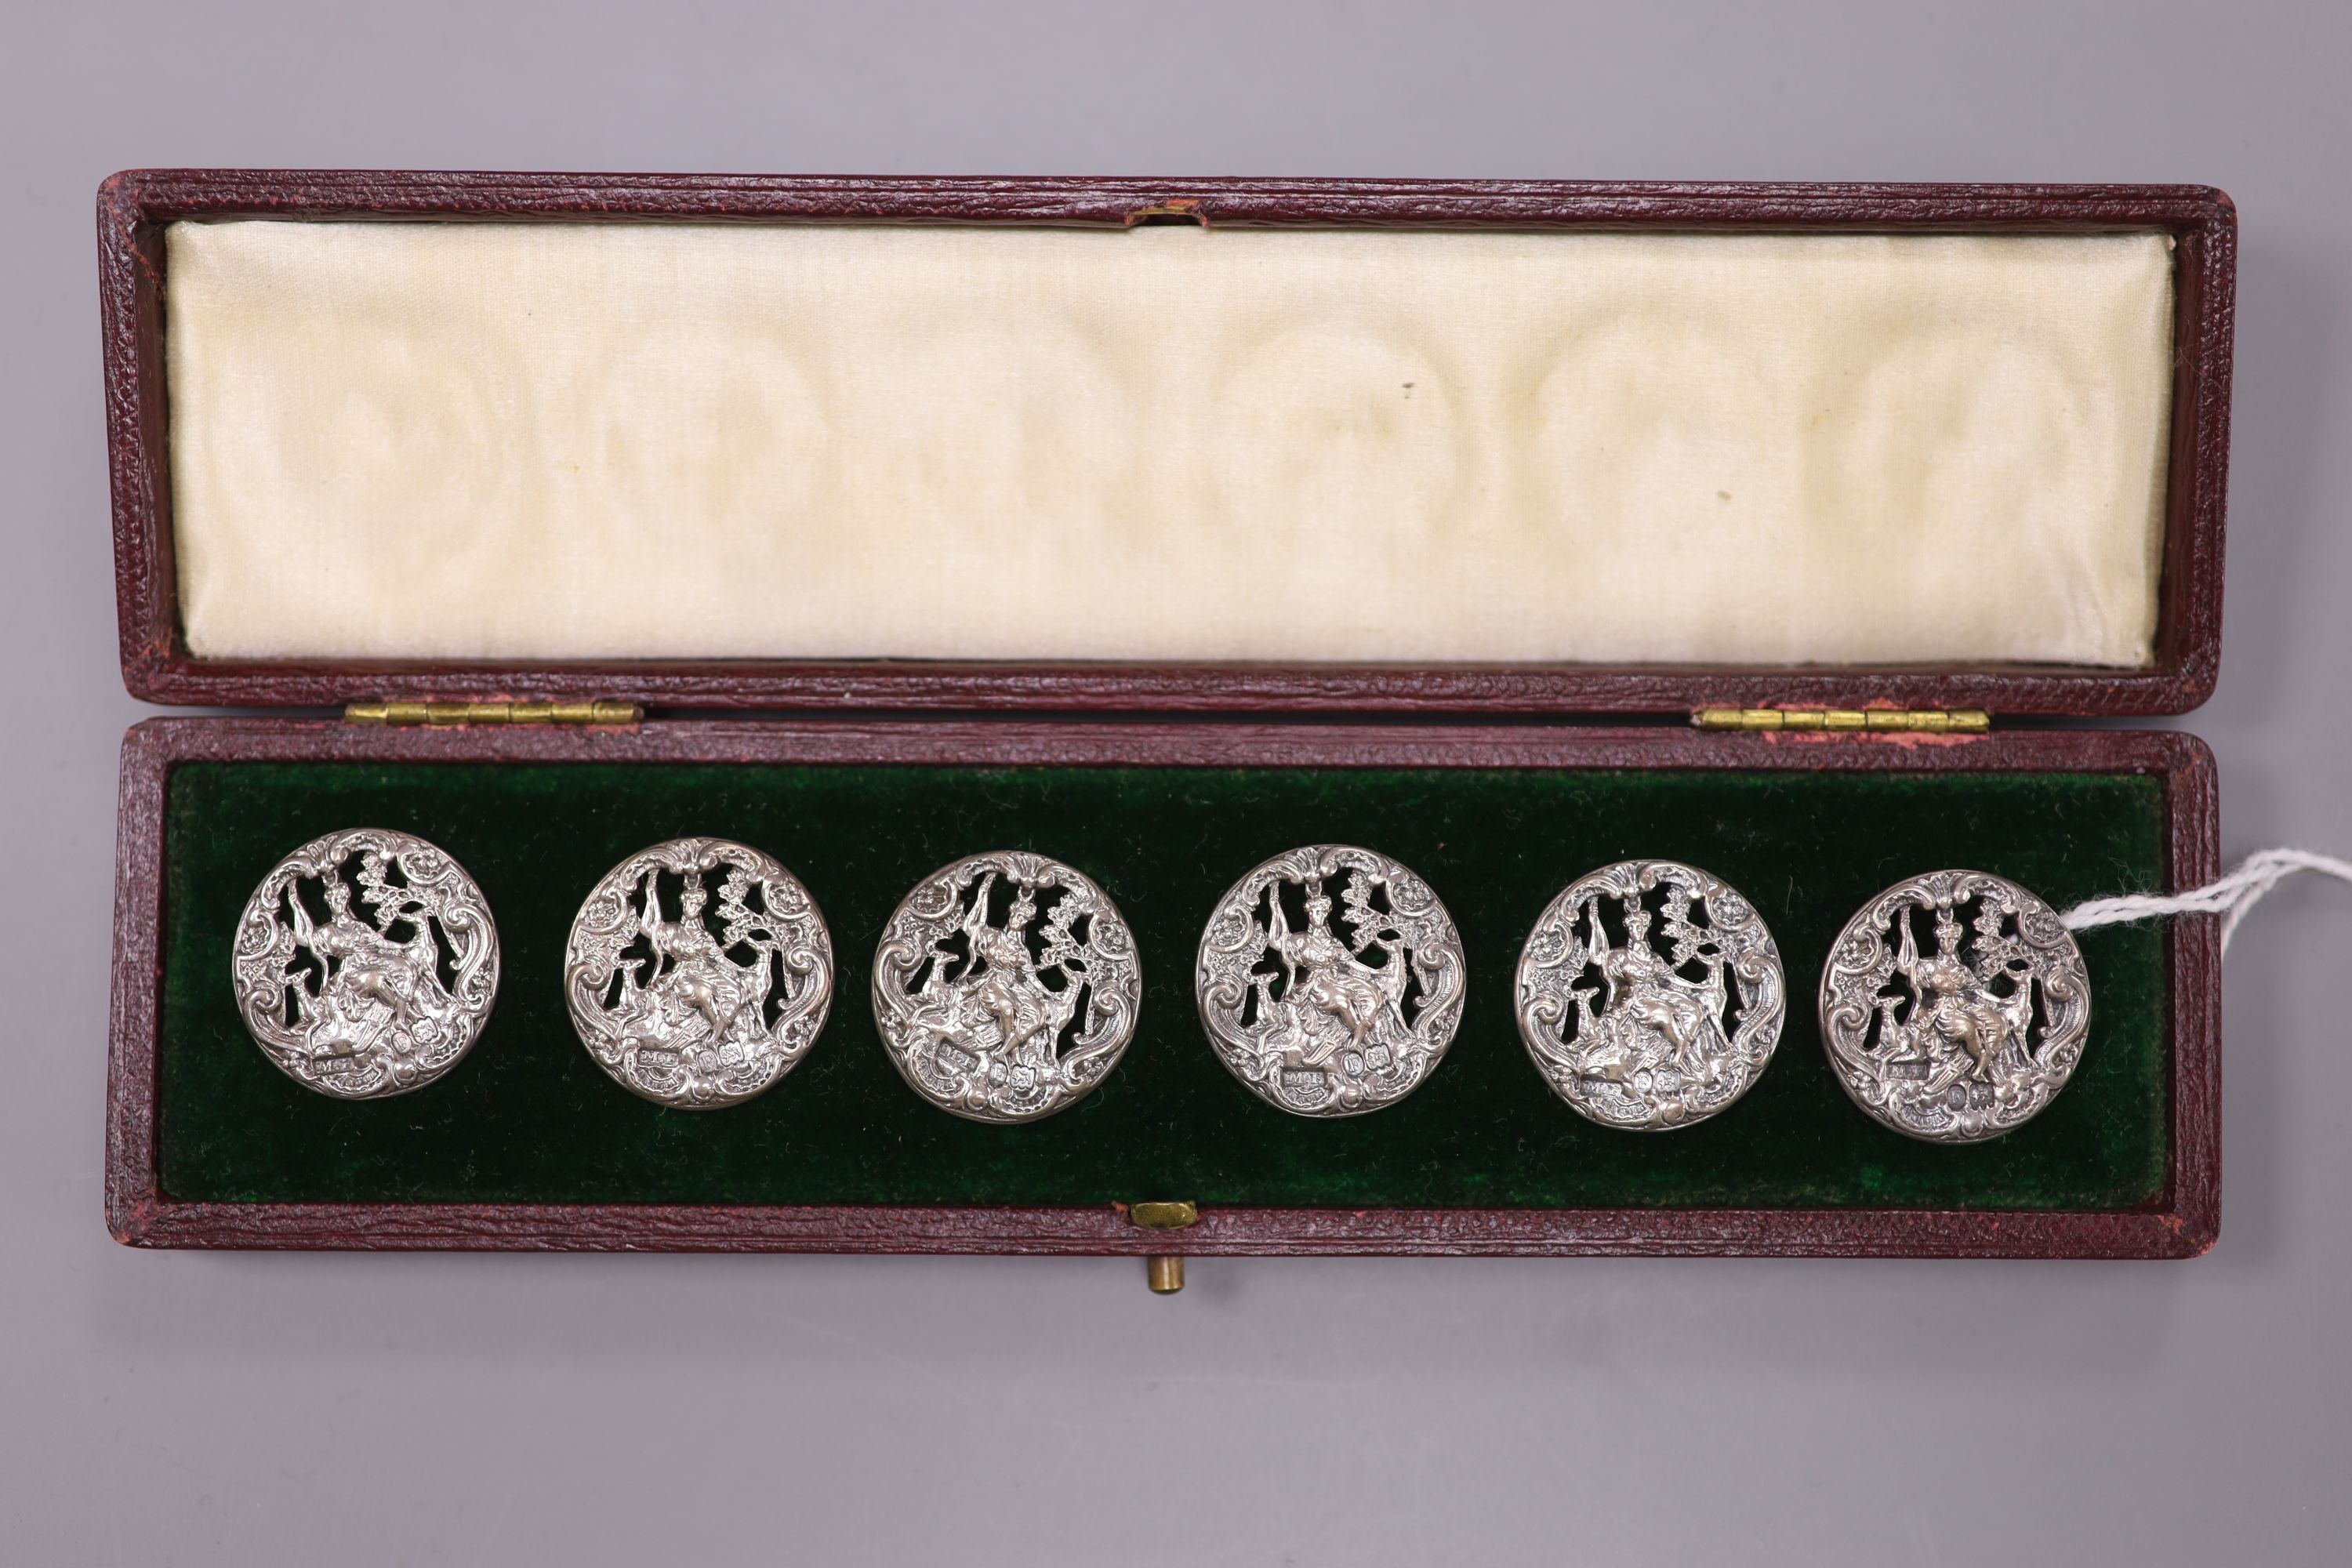 A set of six Victorian silver buttons, cased, depicting Diana the Huntress